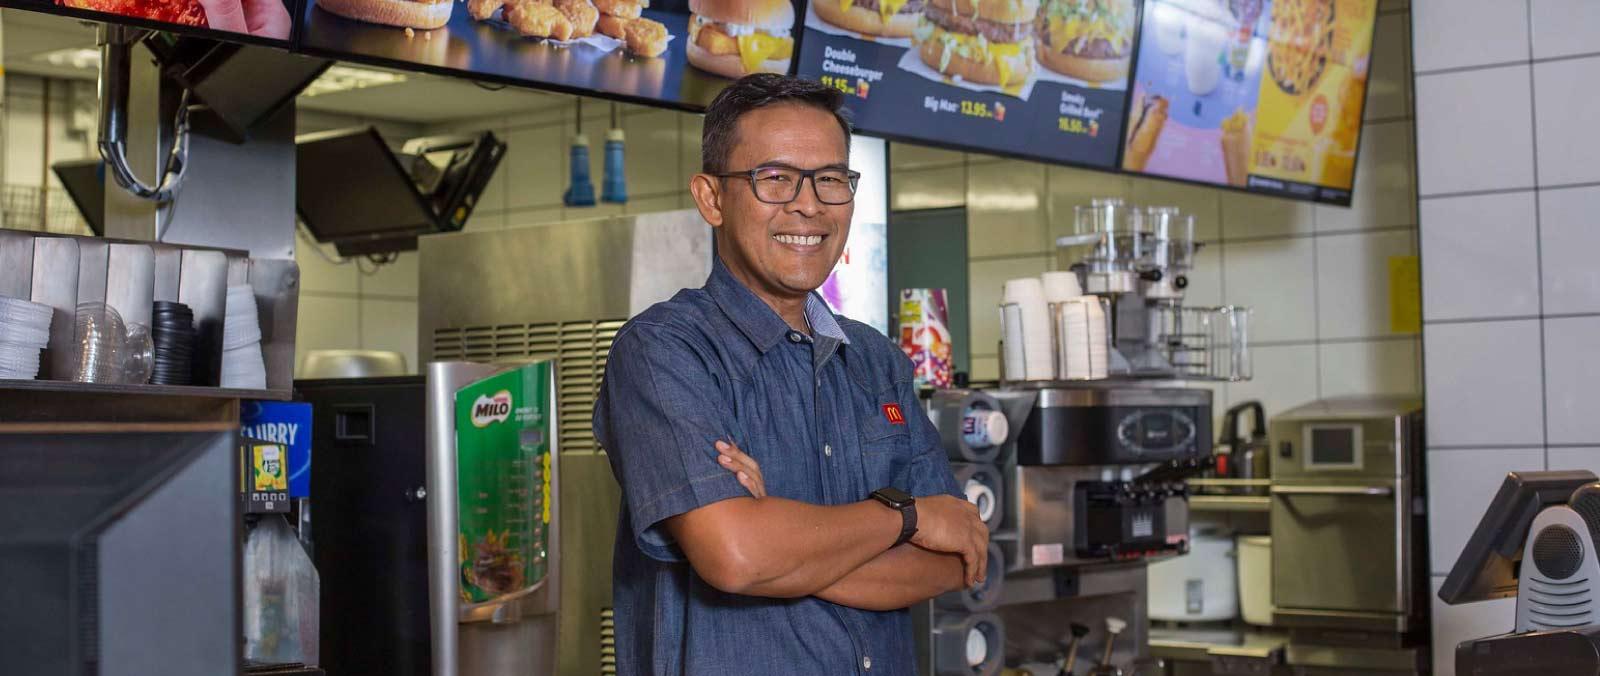 McDonald’s Malaysia Records Highest Sales Performance for 2018 in 36-Year History's image'